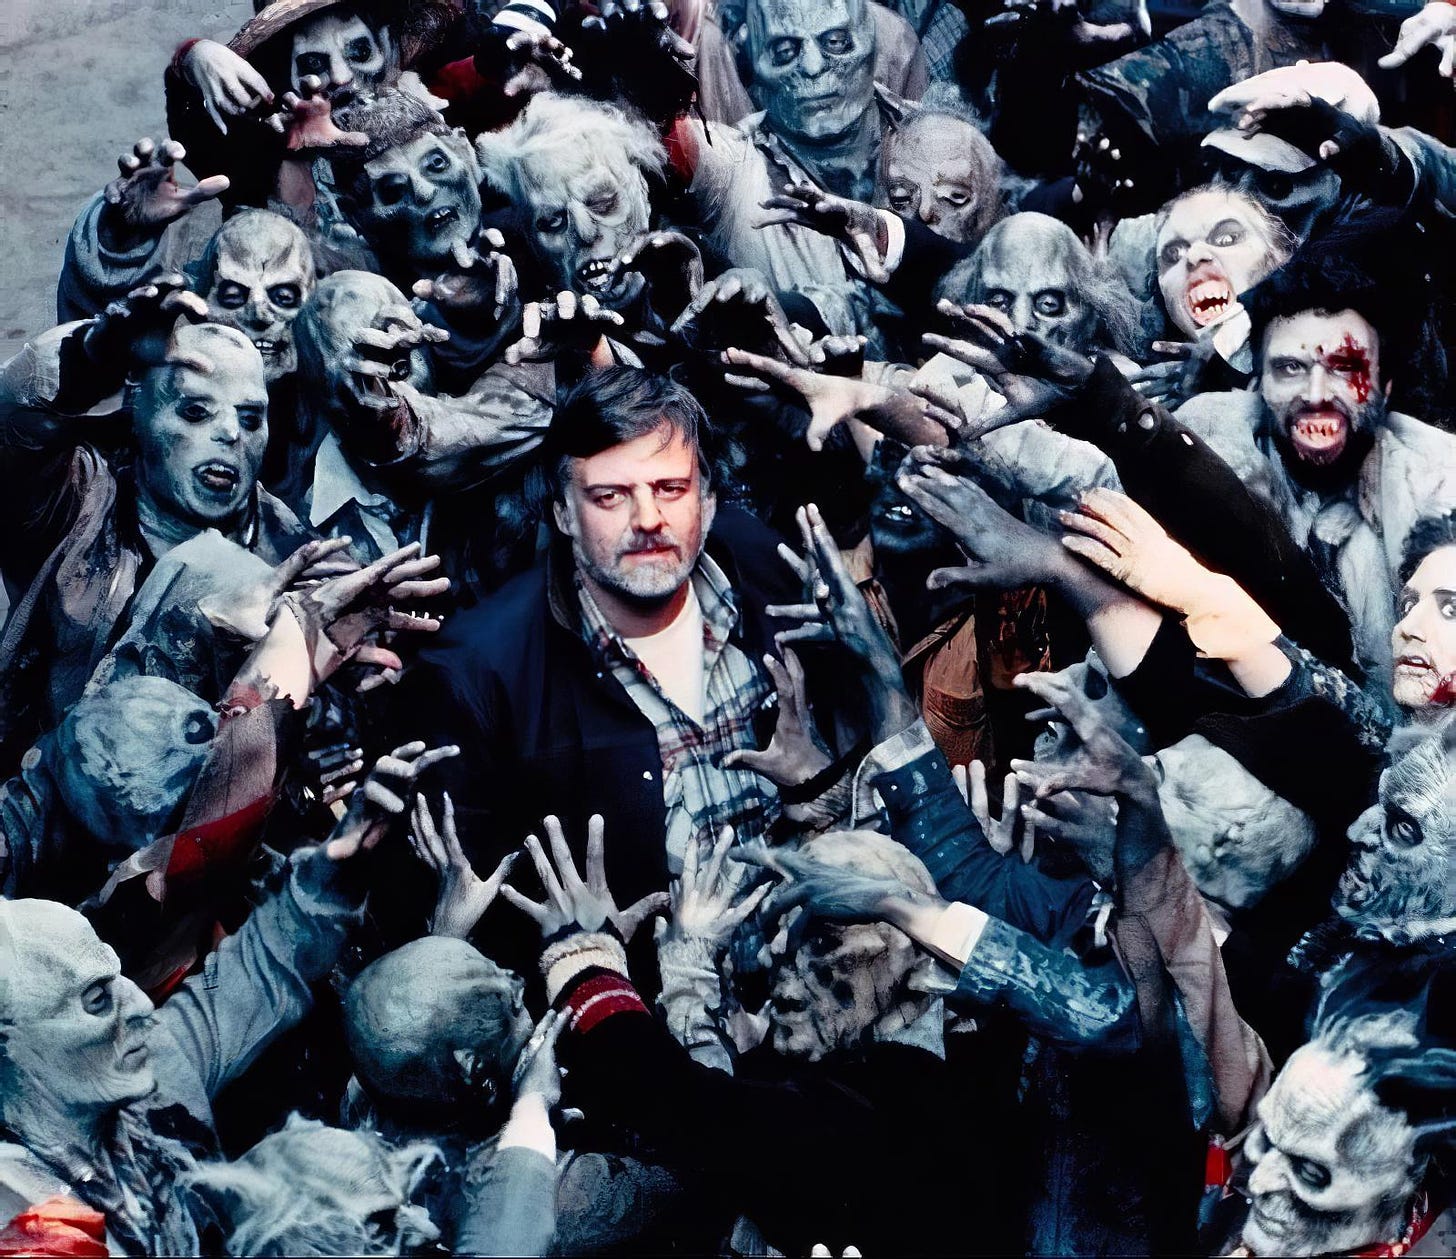 George Romero on the set of Day of the Dead (1985) : r/OldSchoolCool